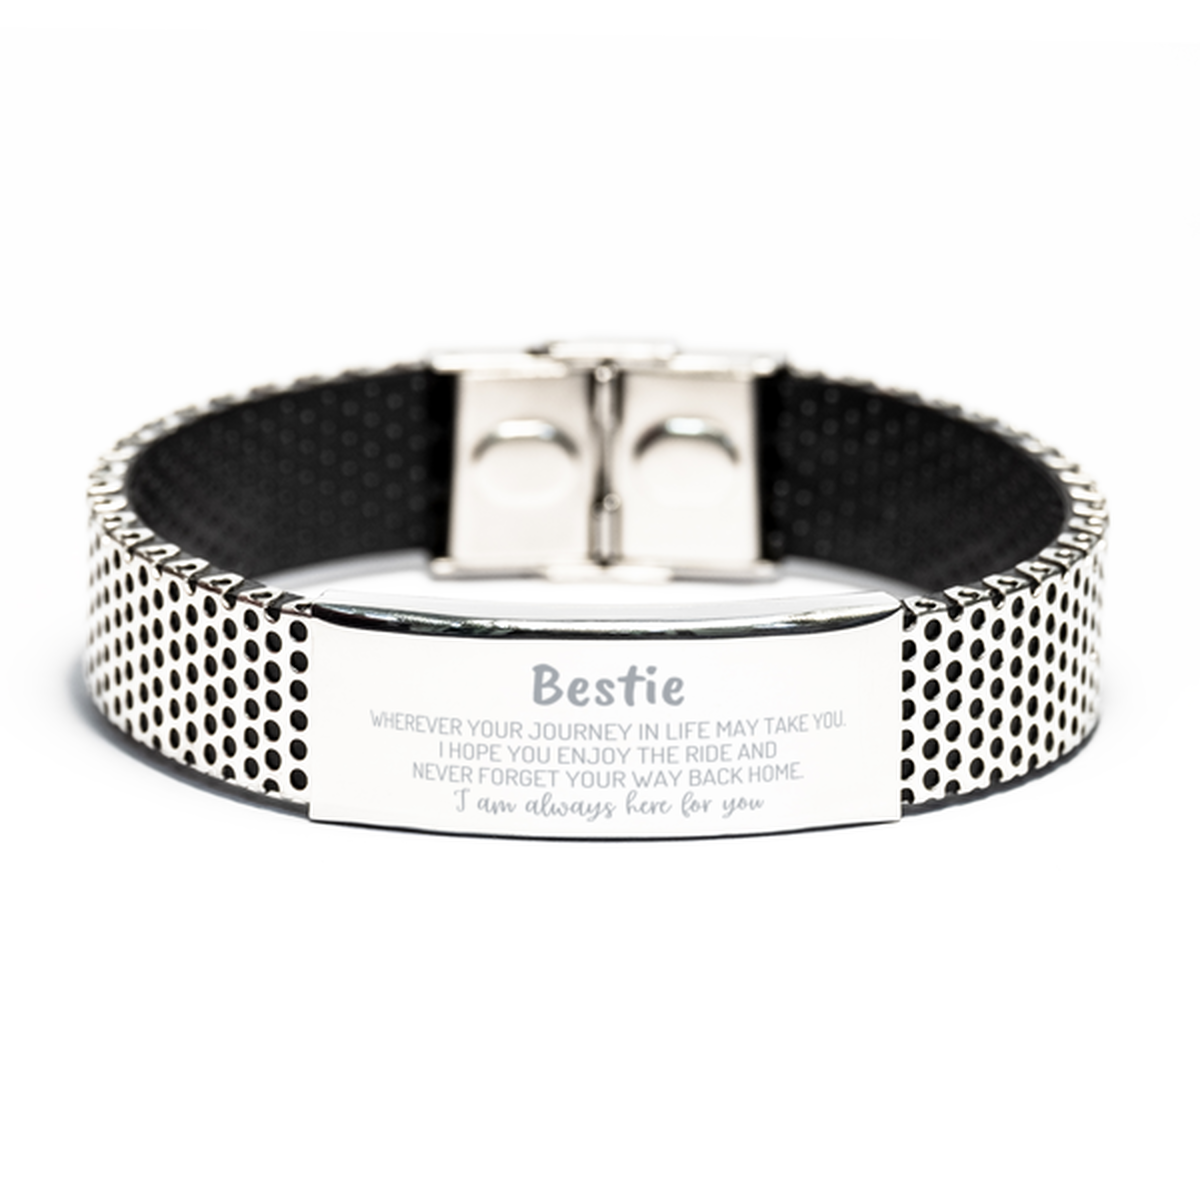 Bestie wherever your journey in life may take you, I am always here for you Bestie Stainless Steel Bracelet, Awesome Christmas Gifts For Bestie, Bestie Birthday Gifts for Men Women Family Loved One